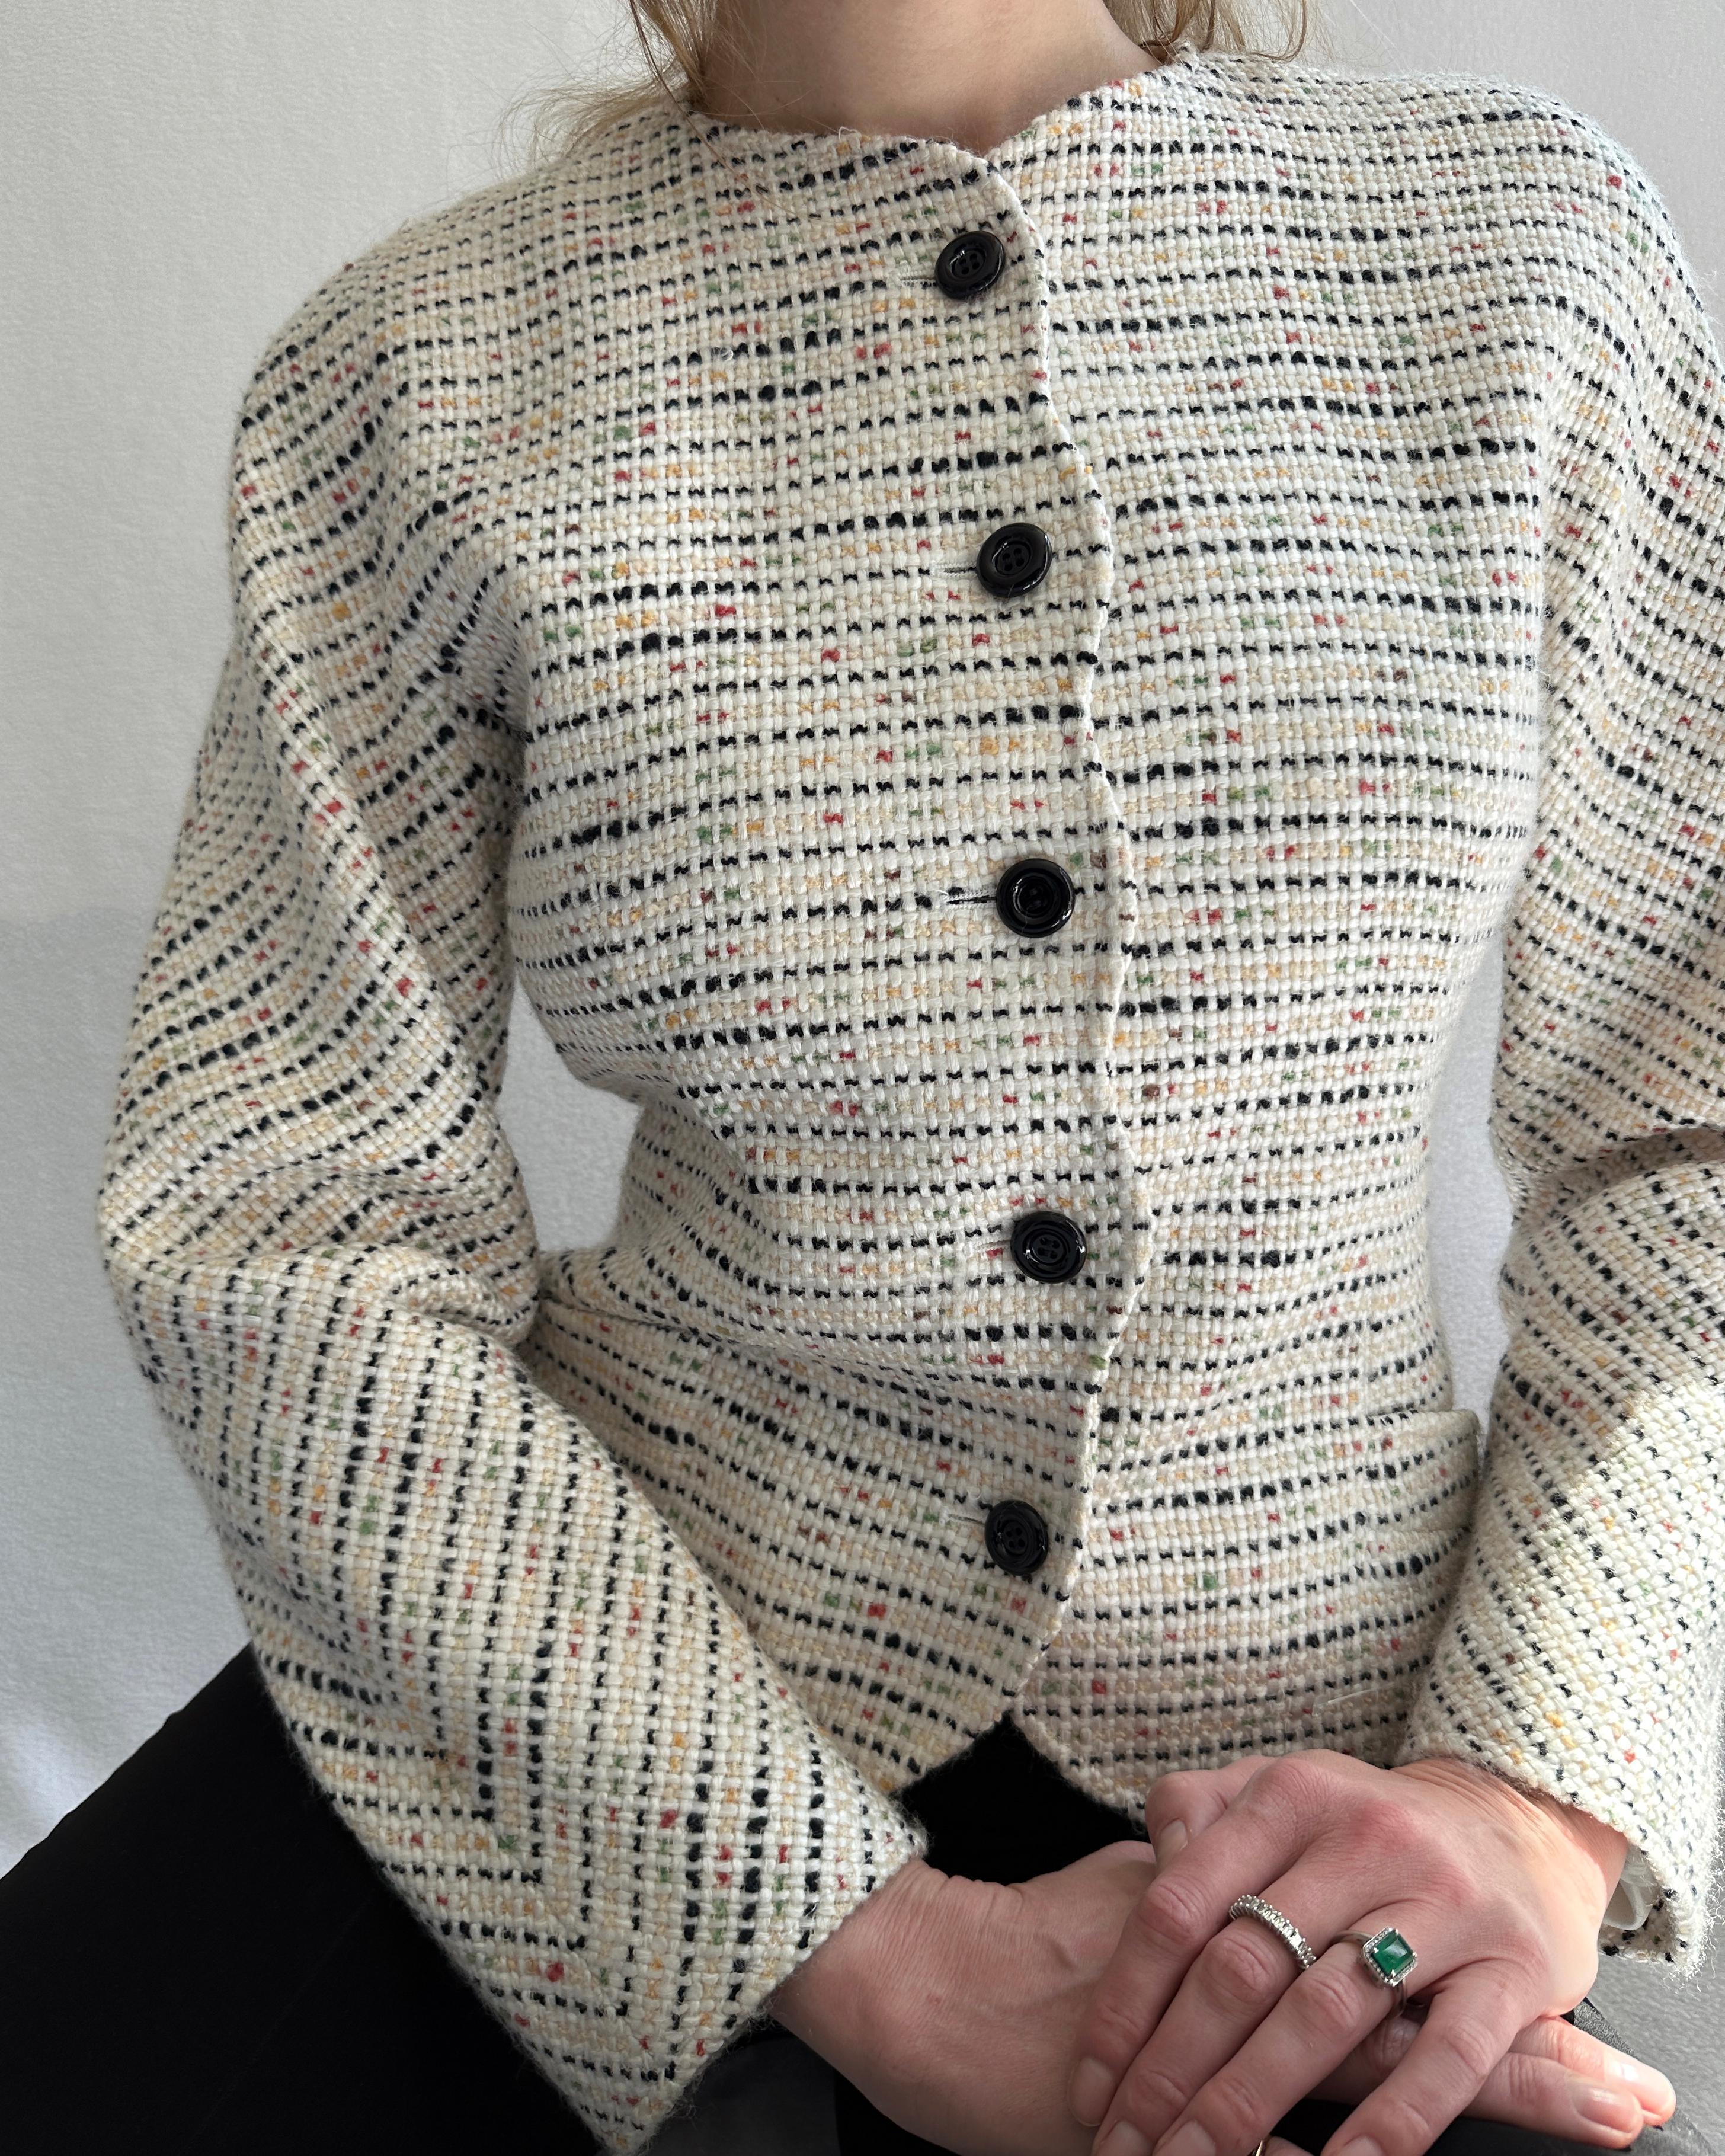 VERY BREEZY presents: It's giving vintage Chanel! Made by Emanuel Unngaro for his Parallele ready-to-wear label in the 1980s, this chic and ladylike jacket features a classic bouclé fabrication, with unexpected whimsical details. Note the squiggle